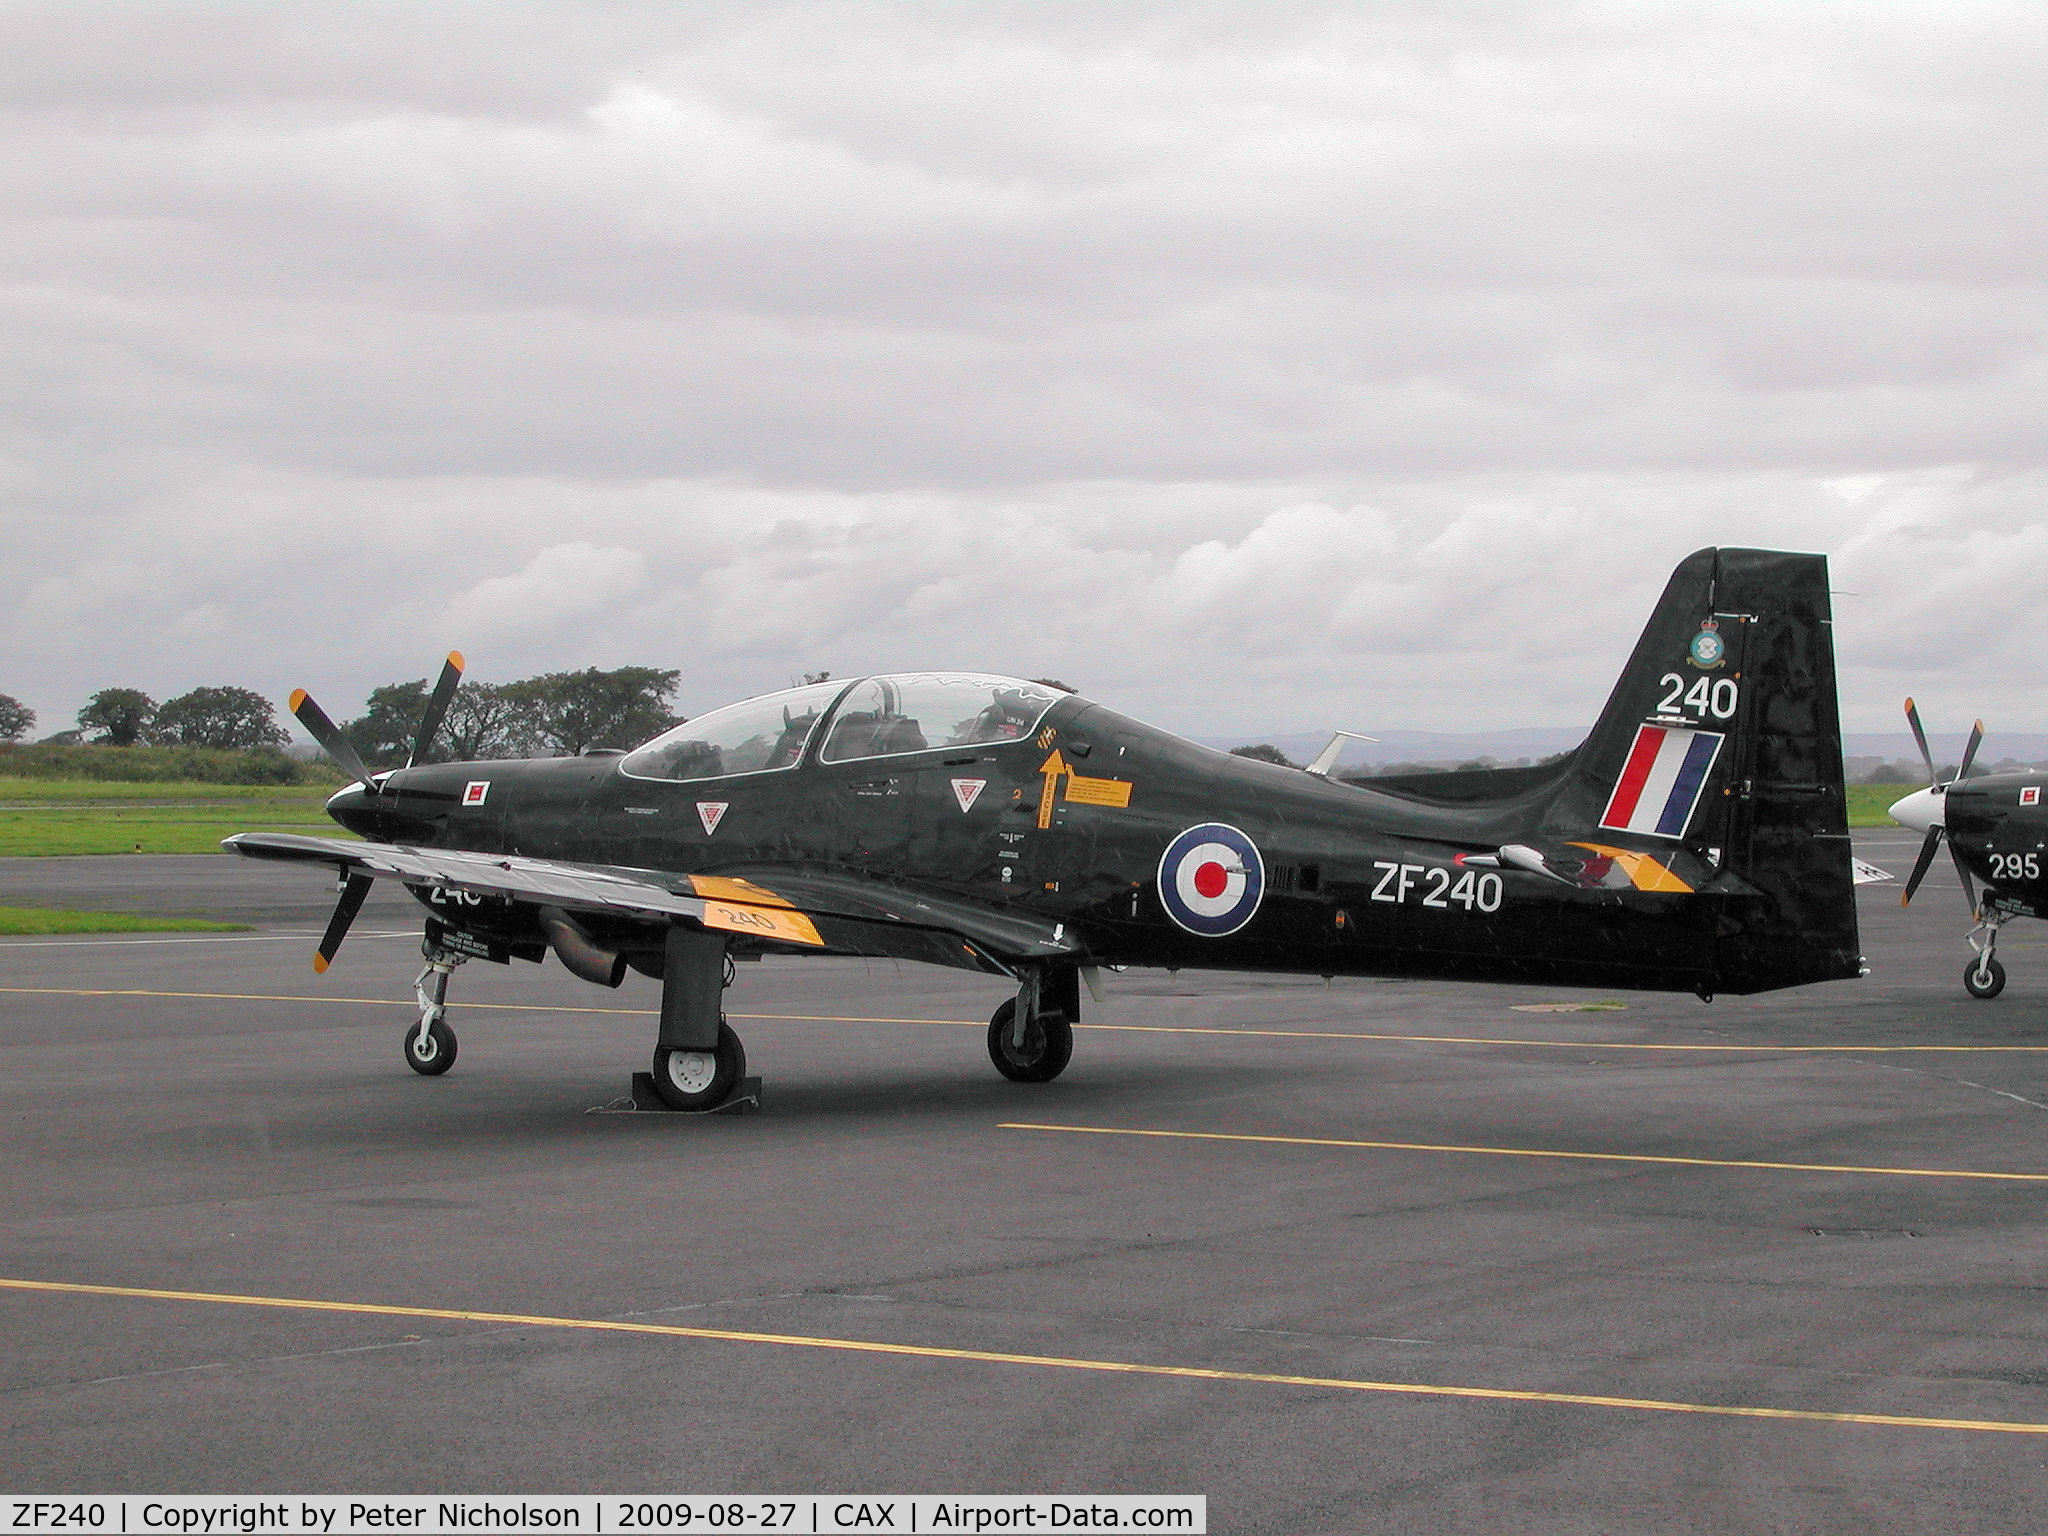 ZF240, 1990 Short S-312 Tucano T1 C/N S043/T40, Tucano T.1 of 1 Flying Training School at RAF Linton-on-Ouse on a visit to Carlisle in the Summer of 2009.